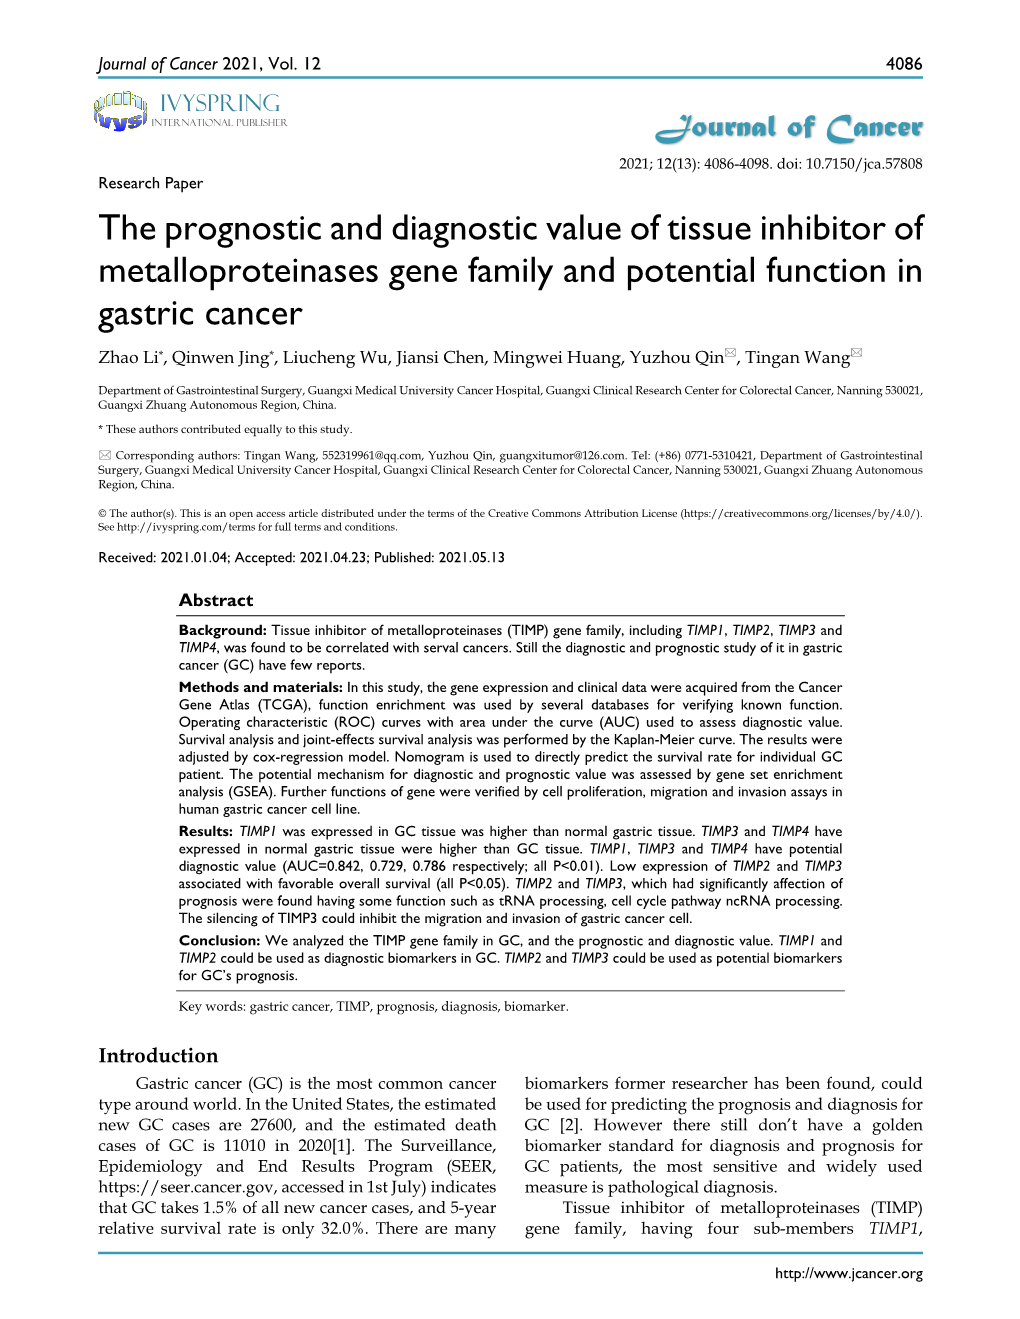 The Prognostic and Diagnostic Value of Tissue Inhibitor Of